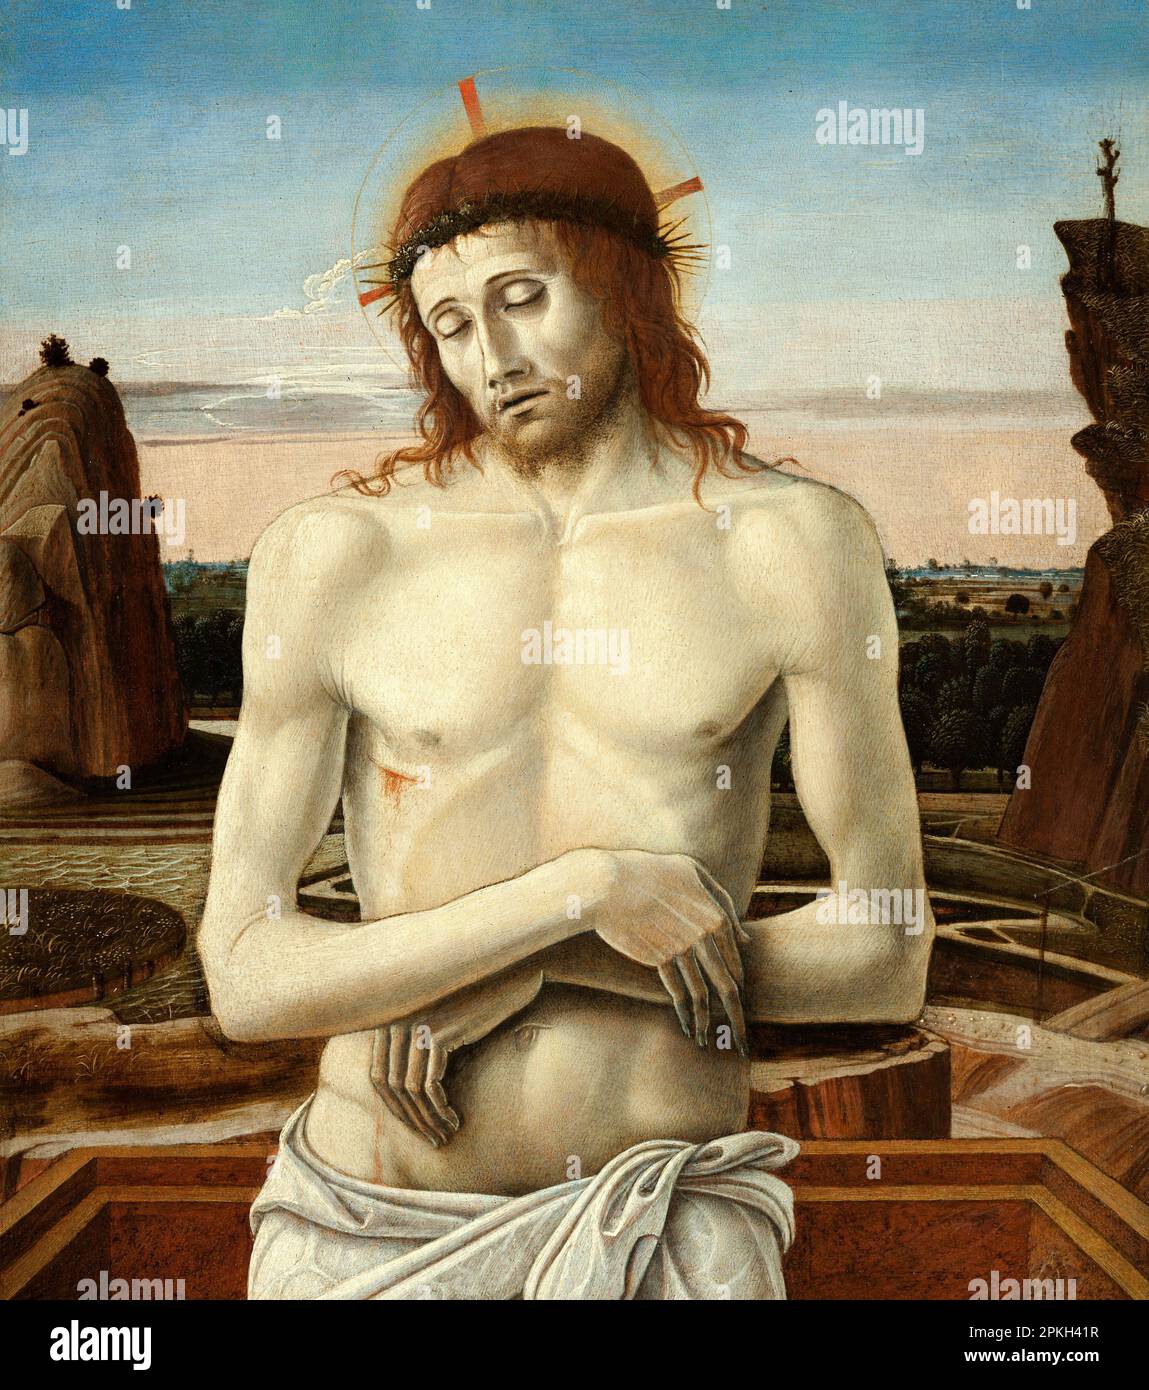 A portrait of Christ painted by the Italian Renaissance artist Giovanni Bellini. He is depicted after his execution, with the wound and crown of thorns visible. Stock Photo